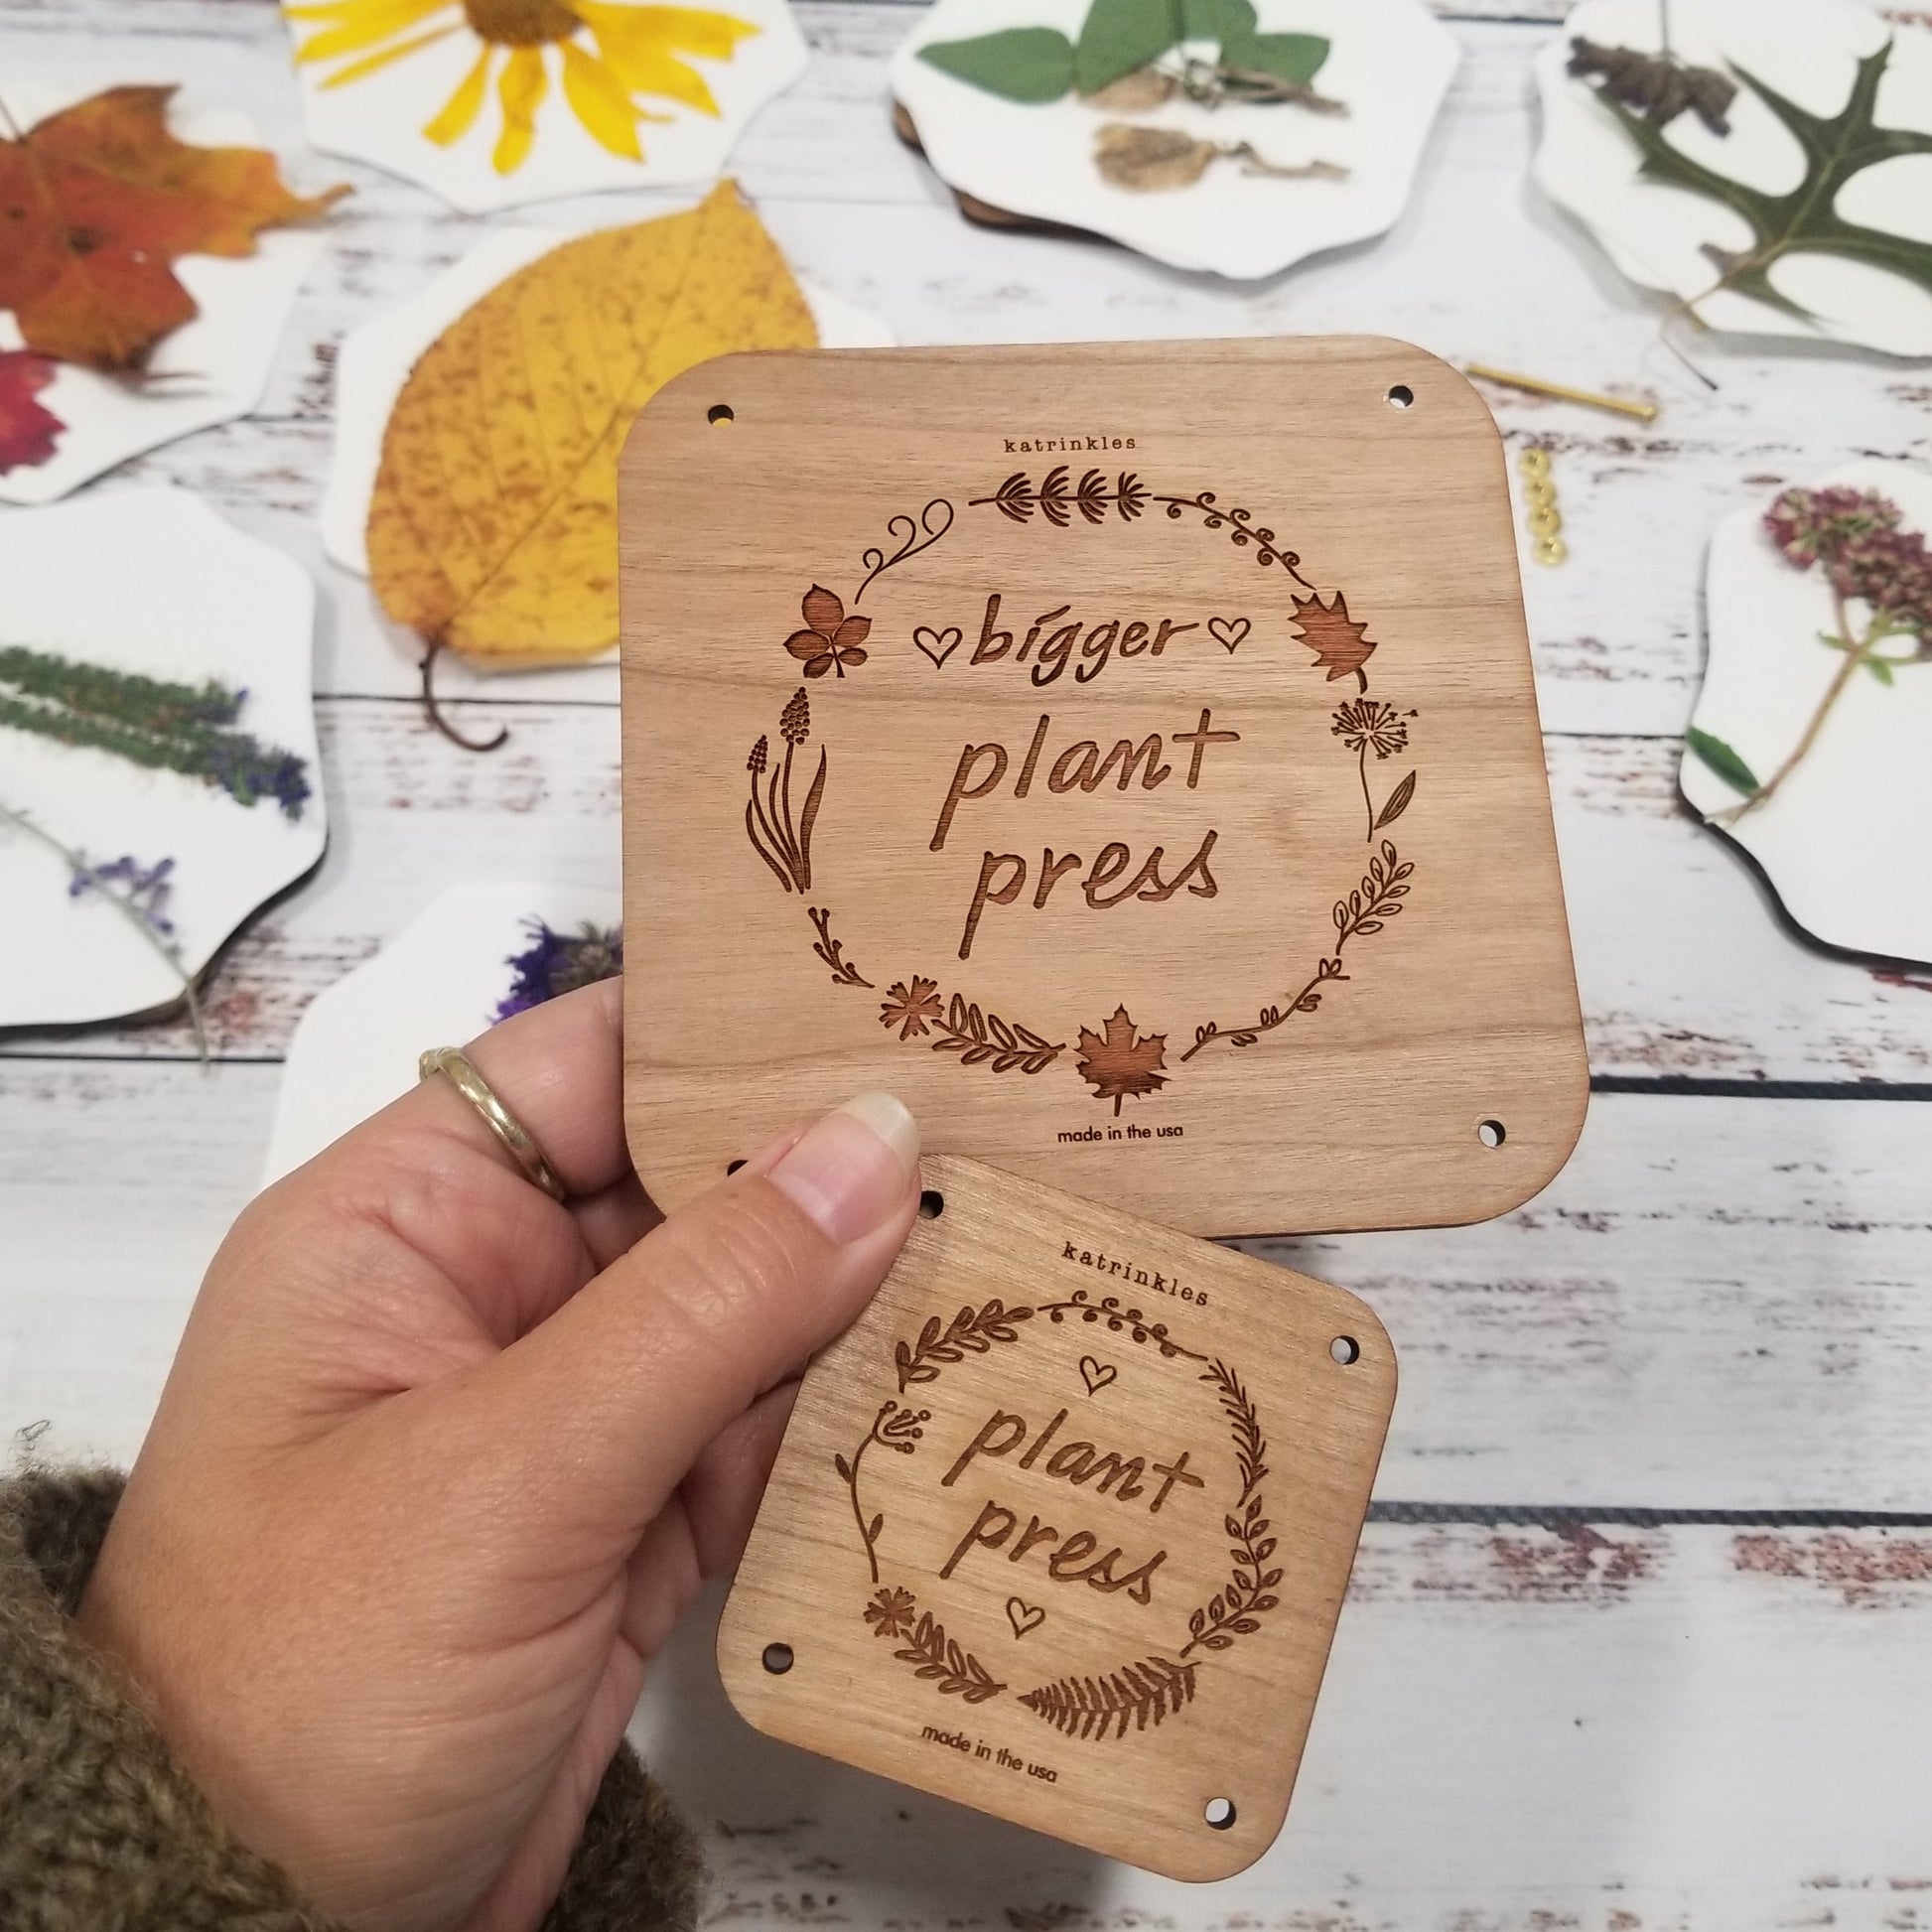 Flower Press, Leaf Press, Plant Press, 6 x 8 inch 4 Layers Nature Press  Including Instructions for Making Specimen and Greeting Cards